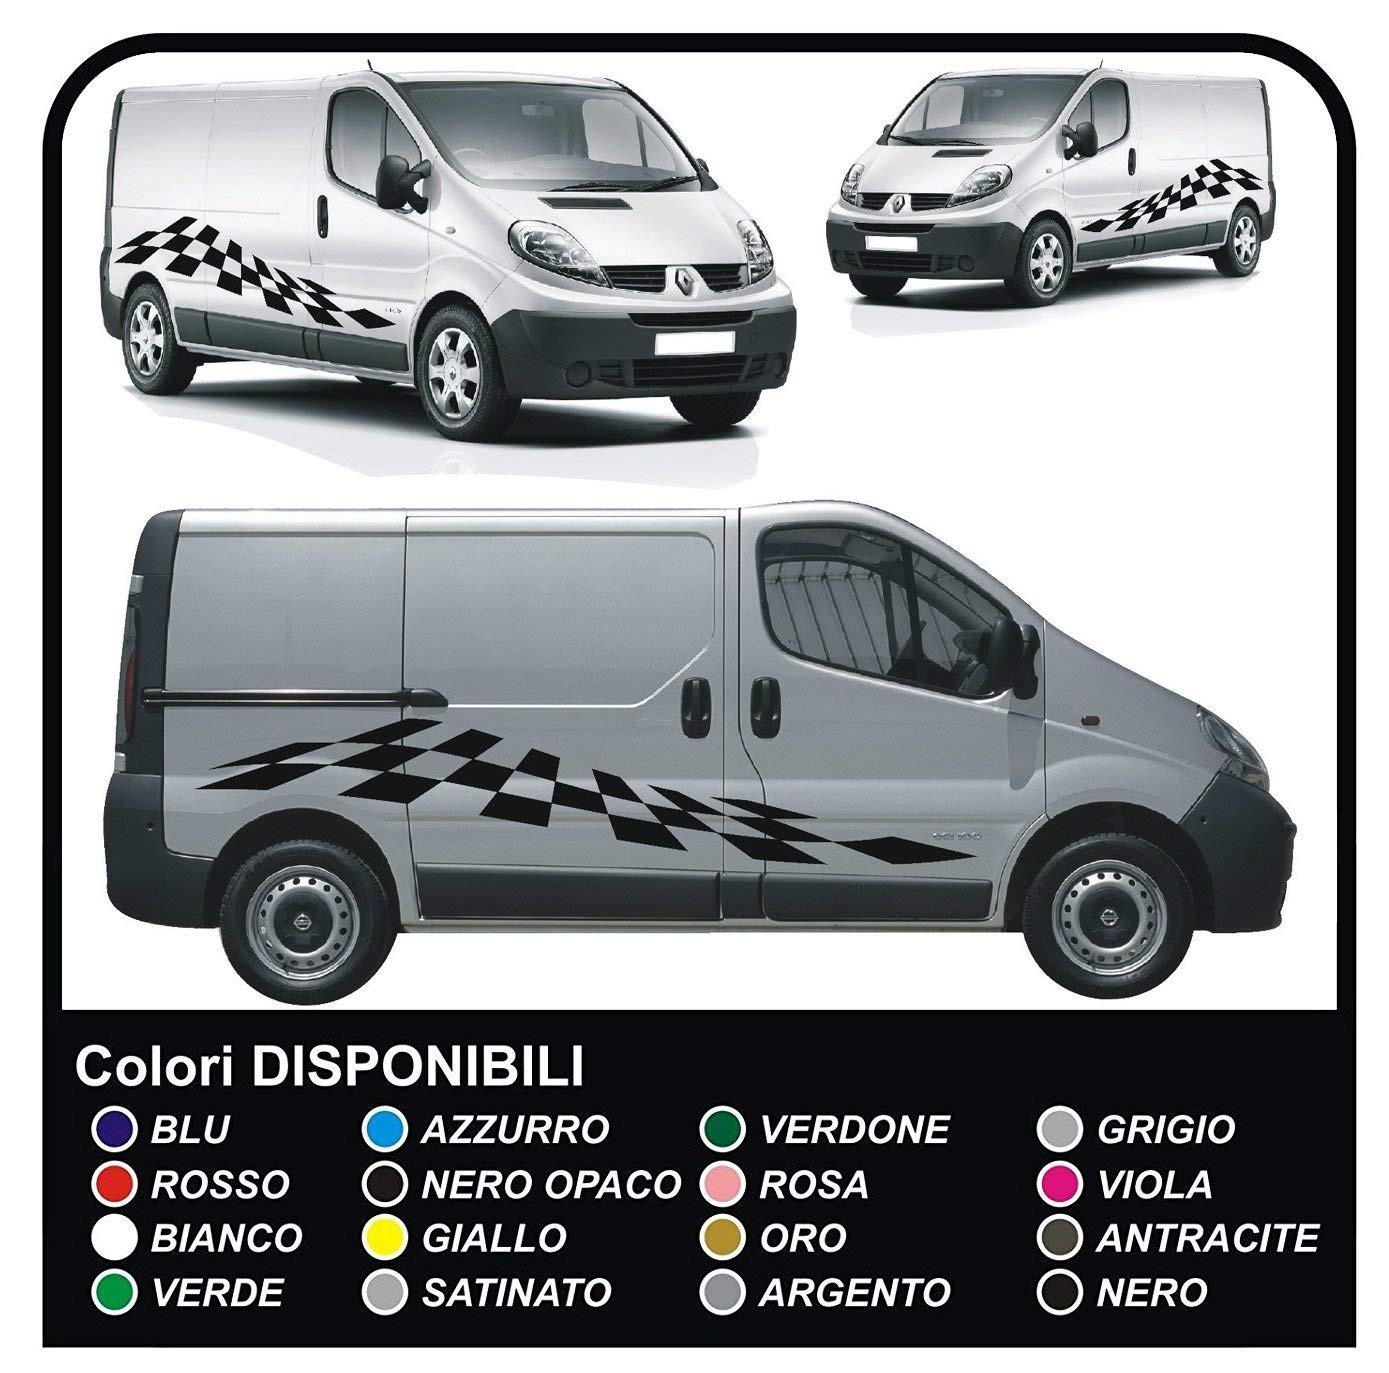 Borgerskab overtale Magtfulde STICKERS for HOOD AND SIDE FOR FORD TRANSIT Custom SWB M-SPORT Van  CHESSBOARD vivaro ducato iveco daily